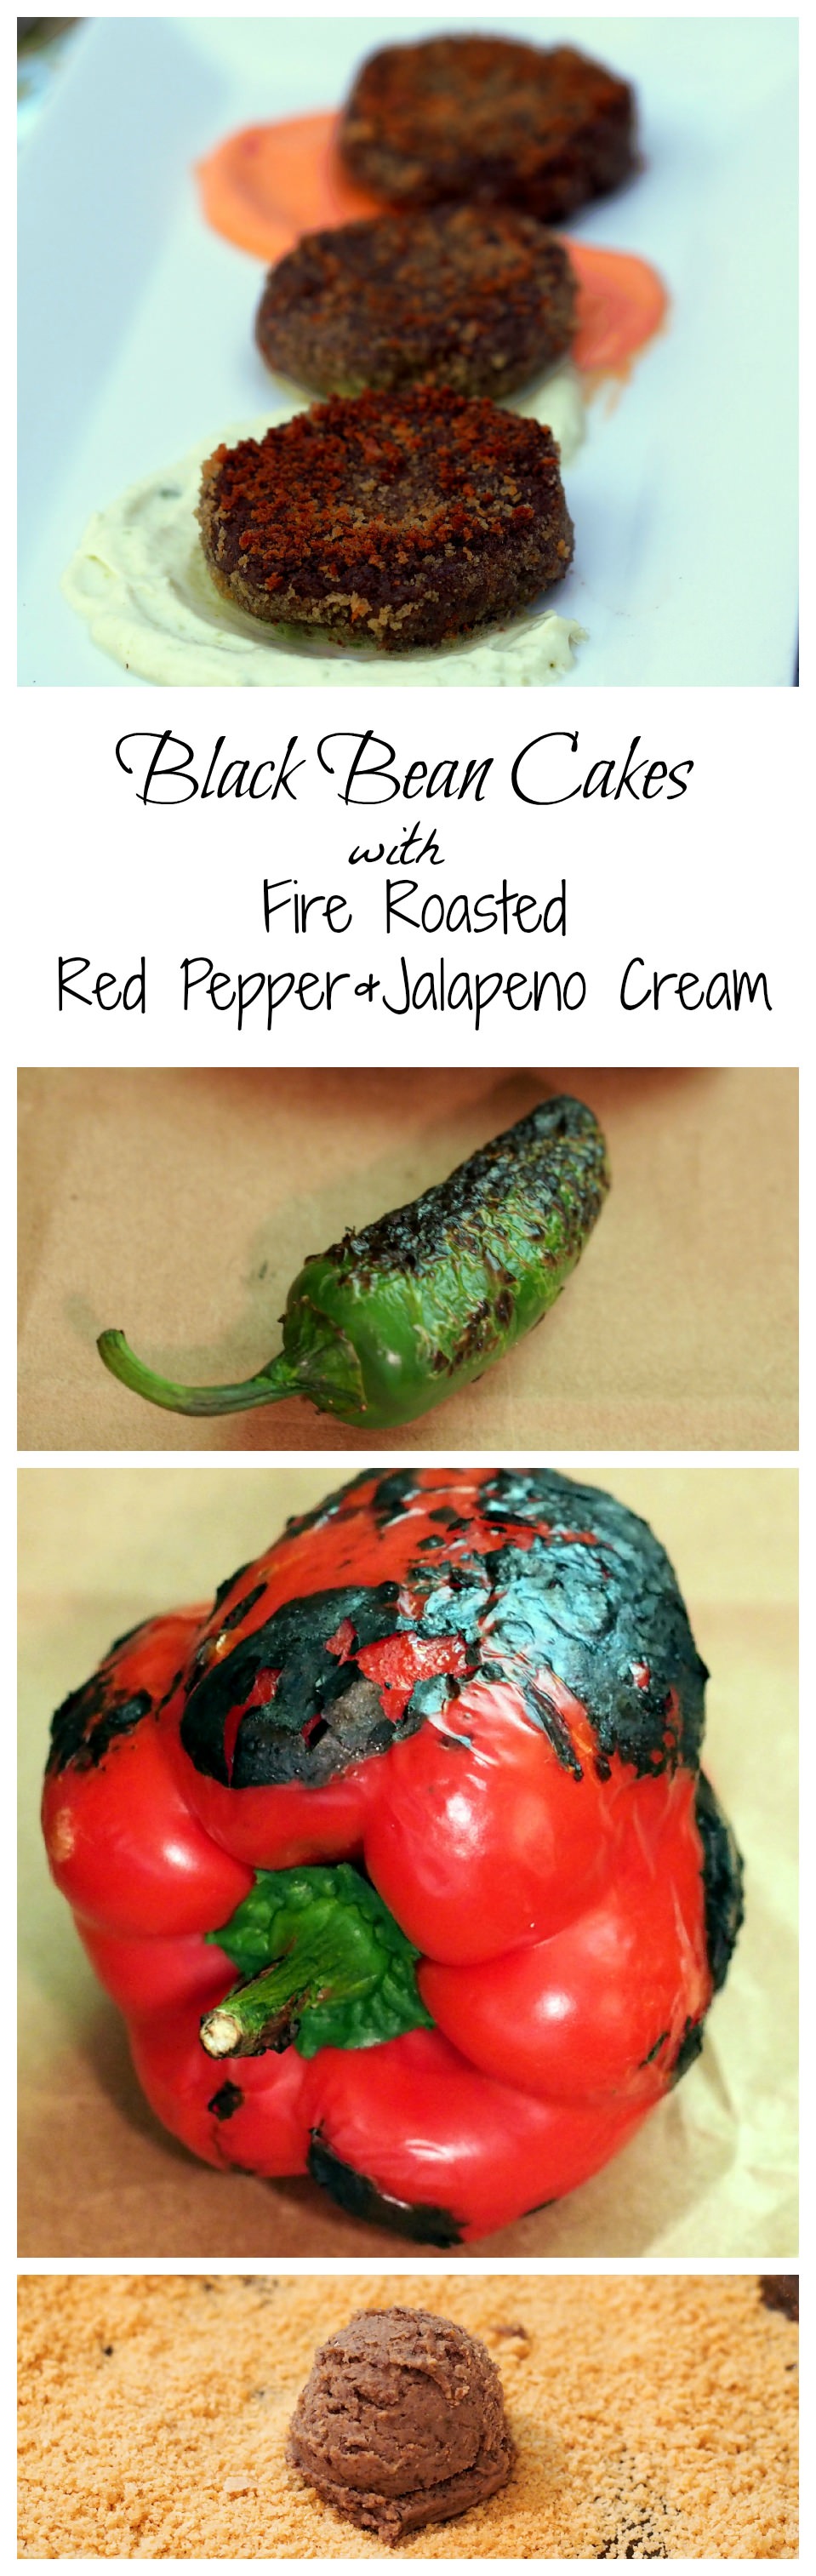 Black-Bean-Cakes-Fire-Roasted-Red-Pepper-and-Jalapeno-Cream | ComfortablyDomestic.com